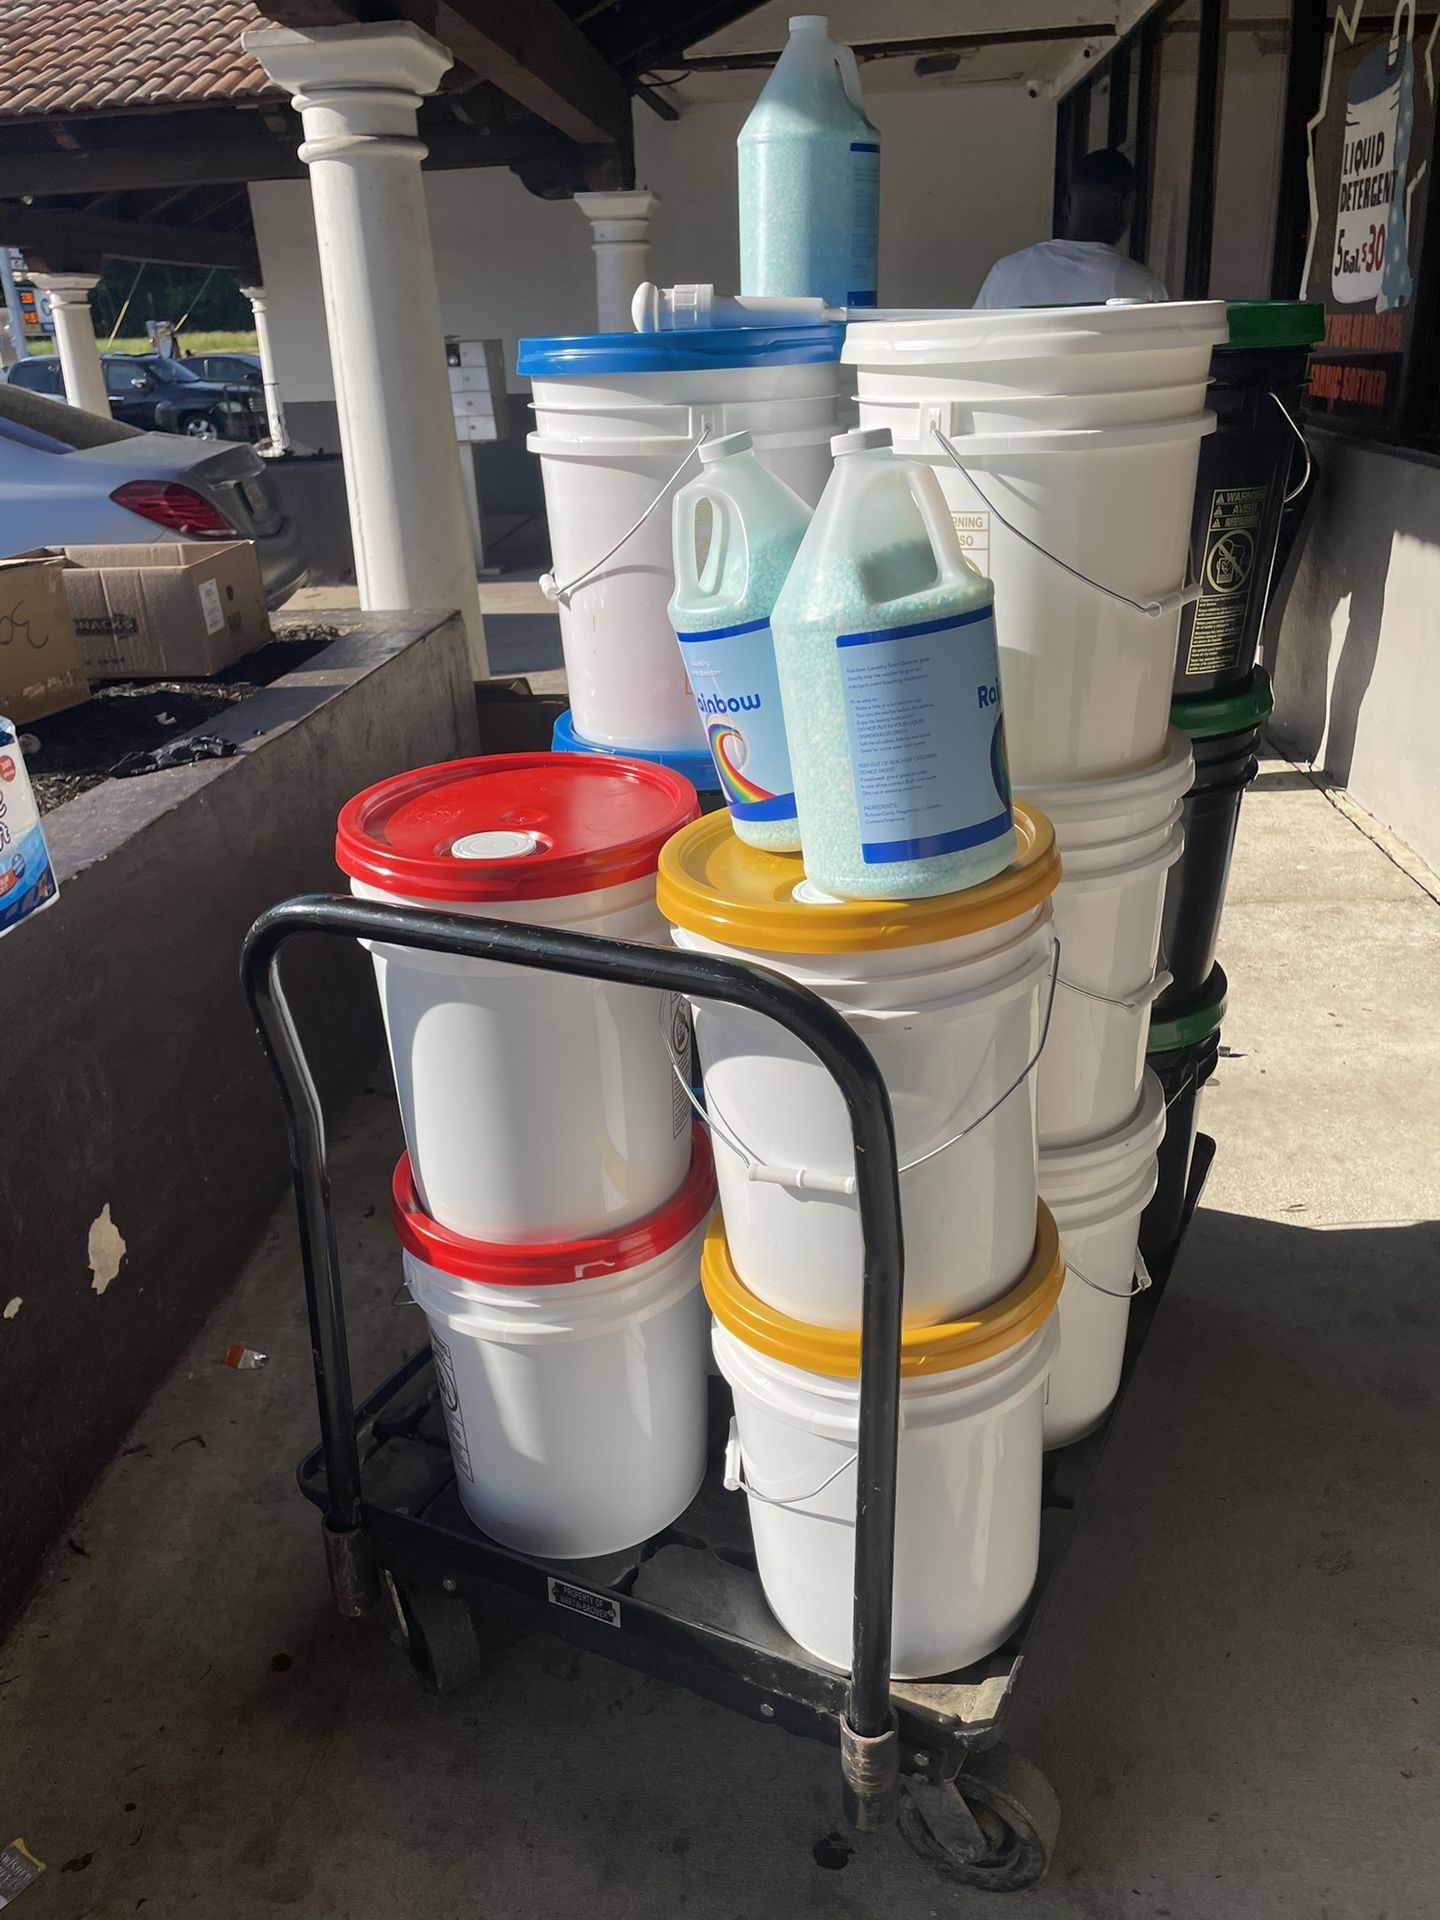 5 Gallons Of Laundry Detergent 